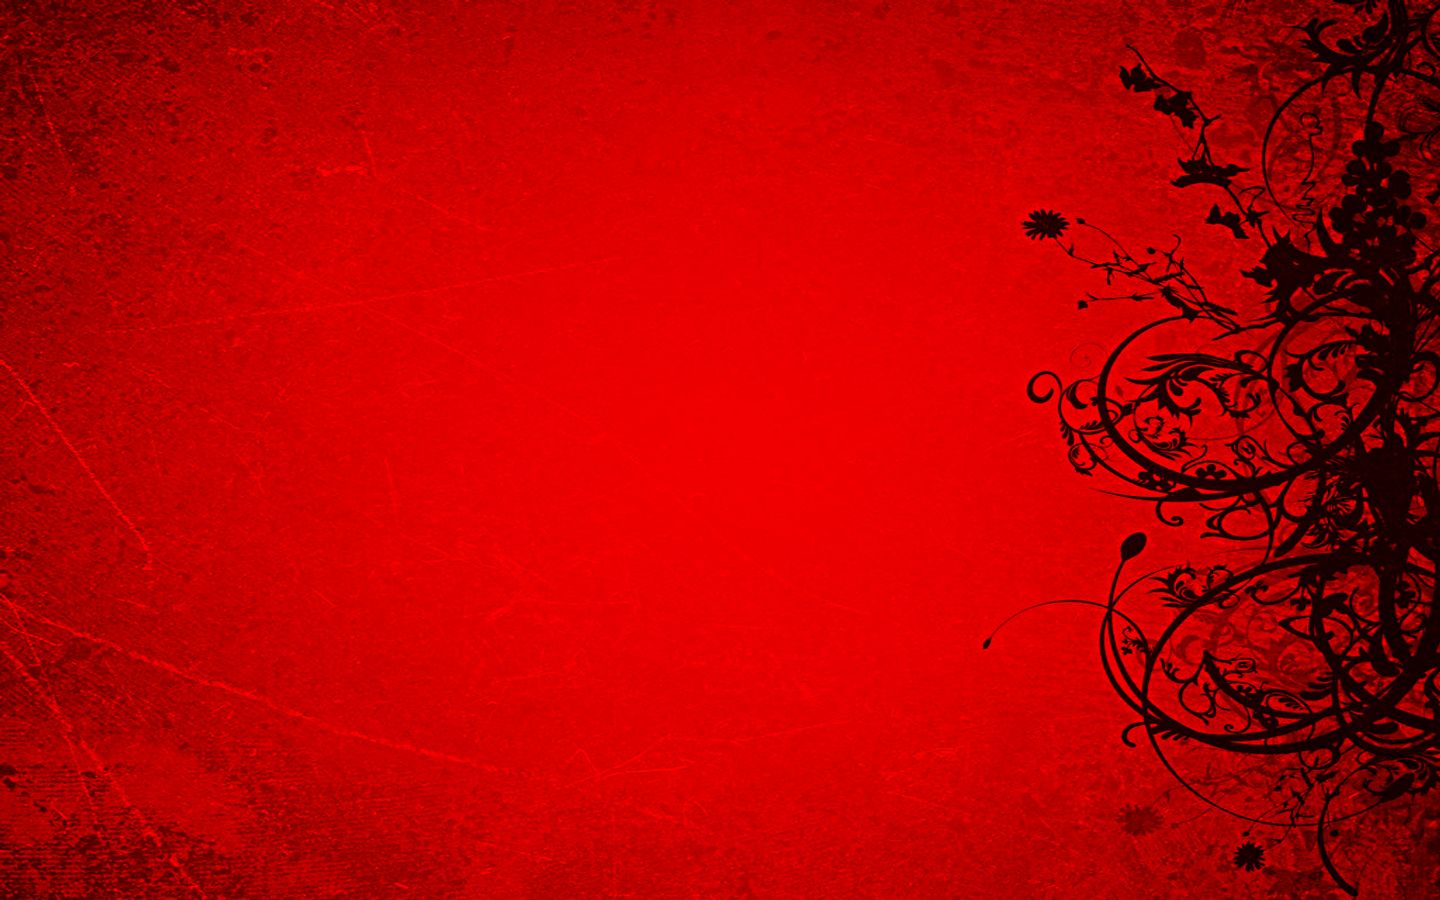 Red Flare backgrounds